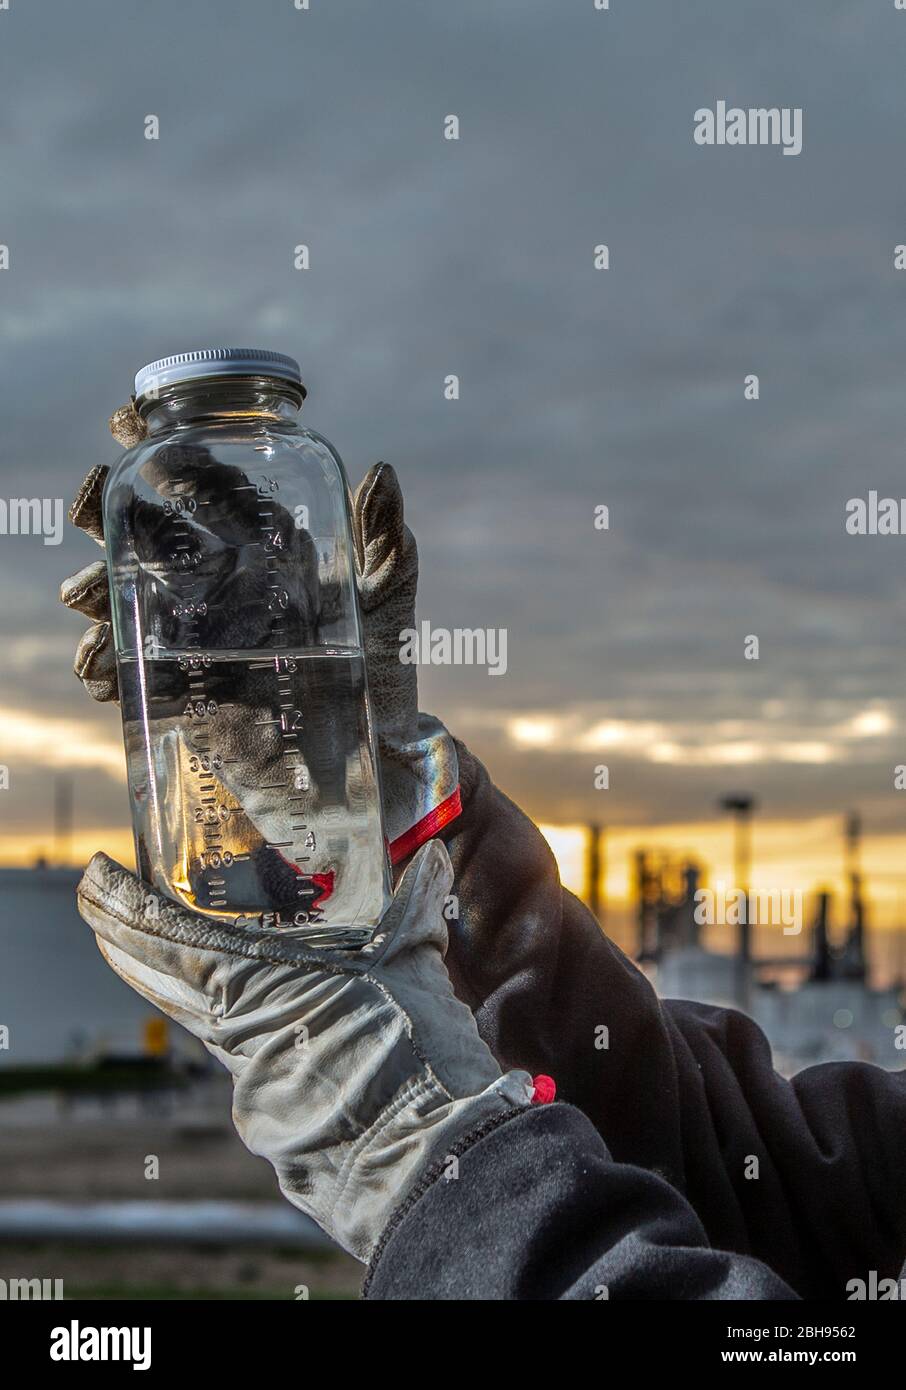 Chemical sample taken at refinery Stock Photo